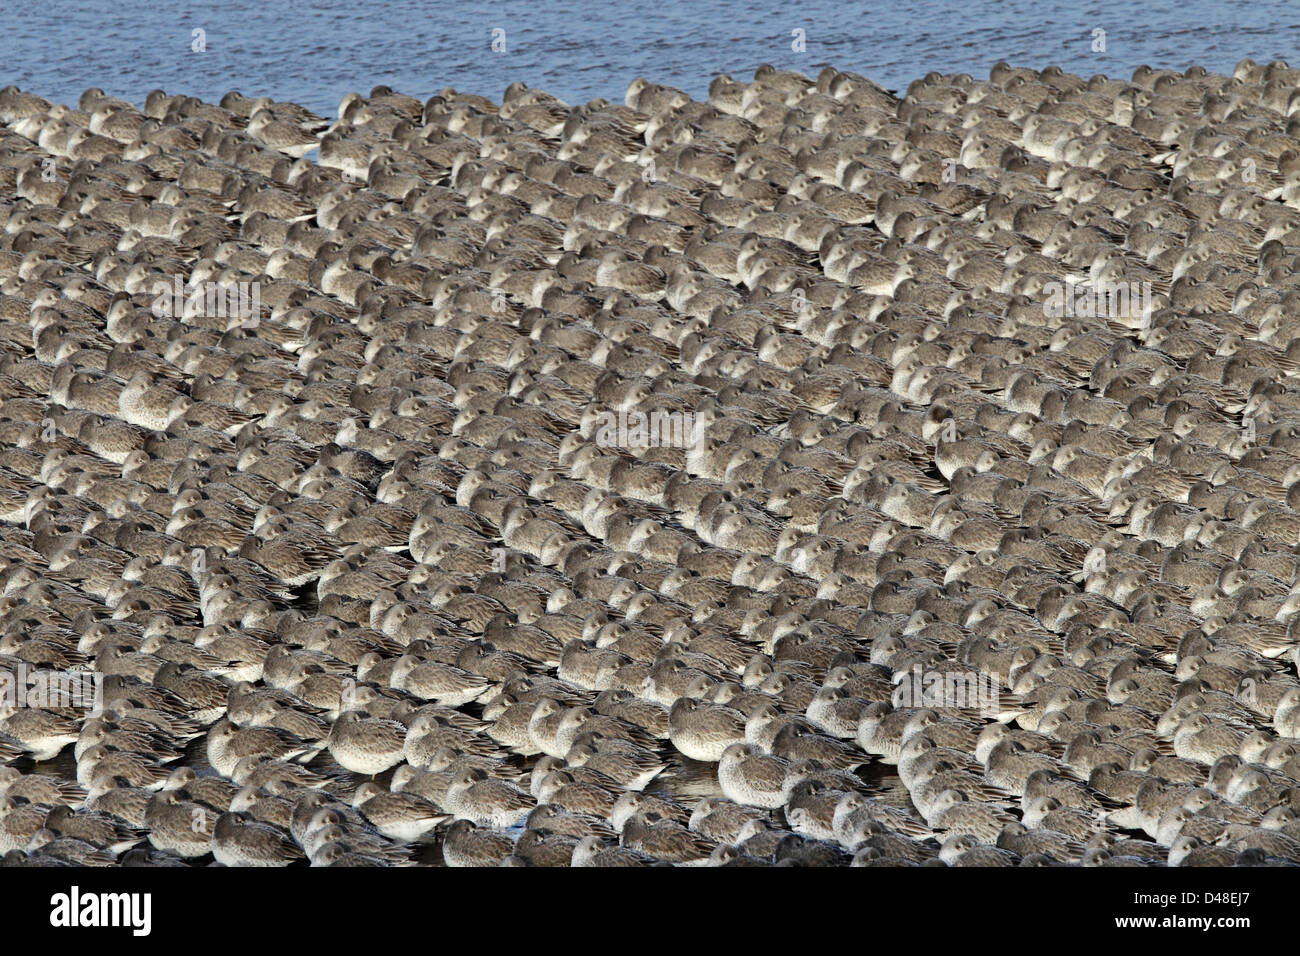 Knot (Calidris canutus) roosting on shore Liverpool Bay UK December 1688 Stock Photo